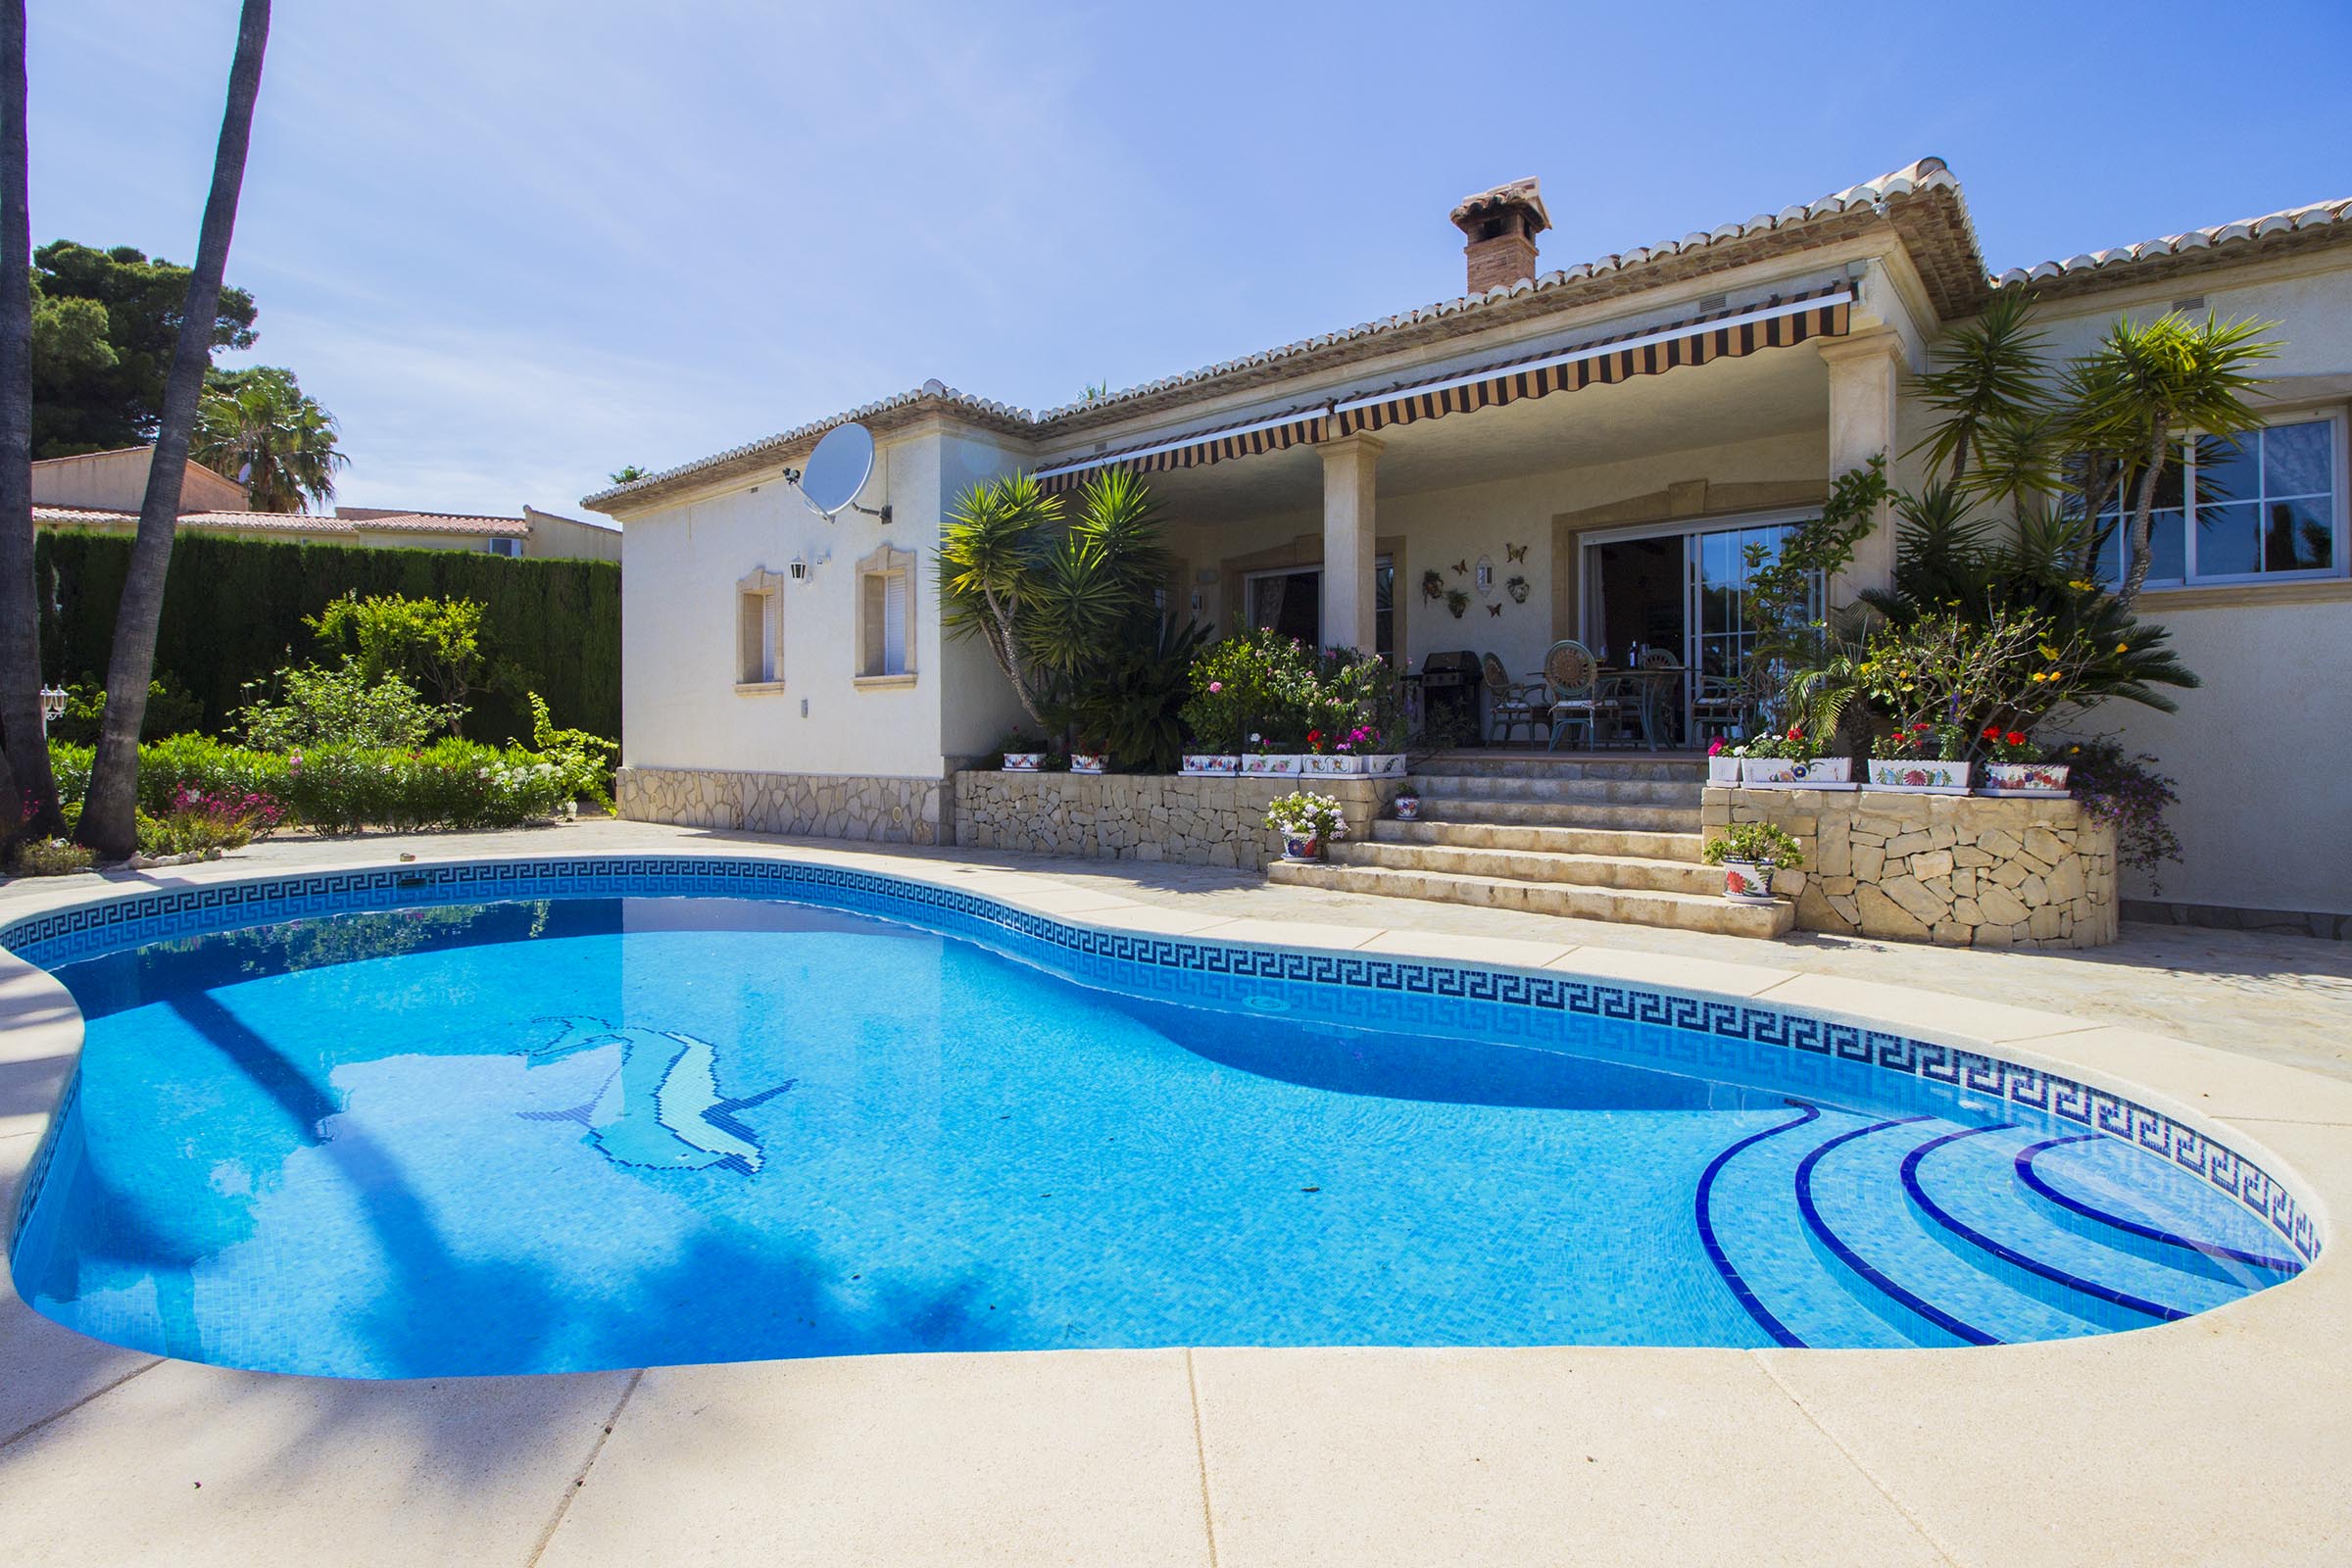 Luxury villa within walking distance of the beach and the centre